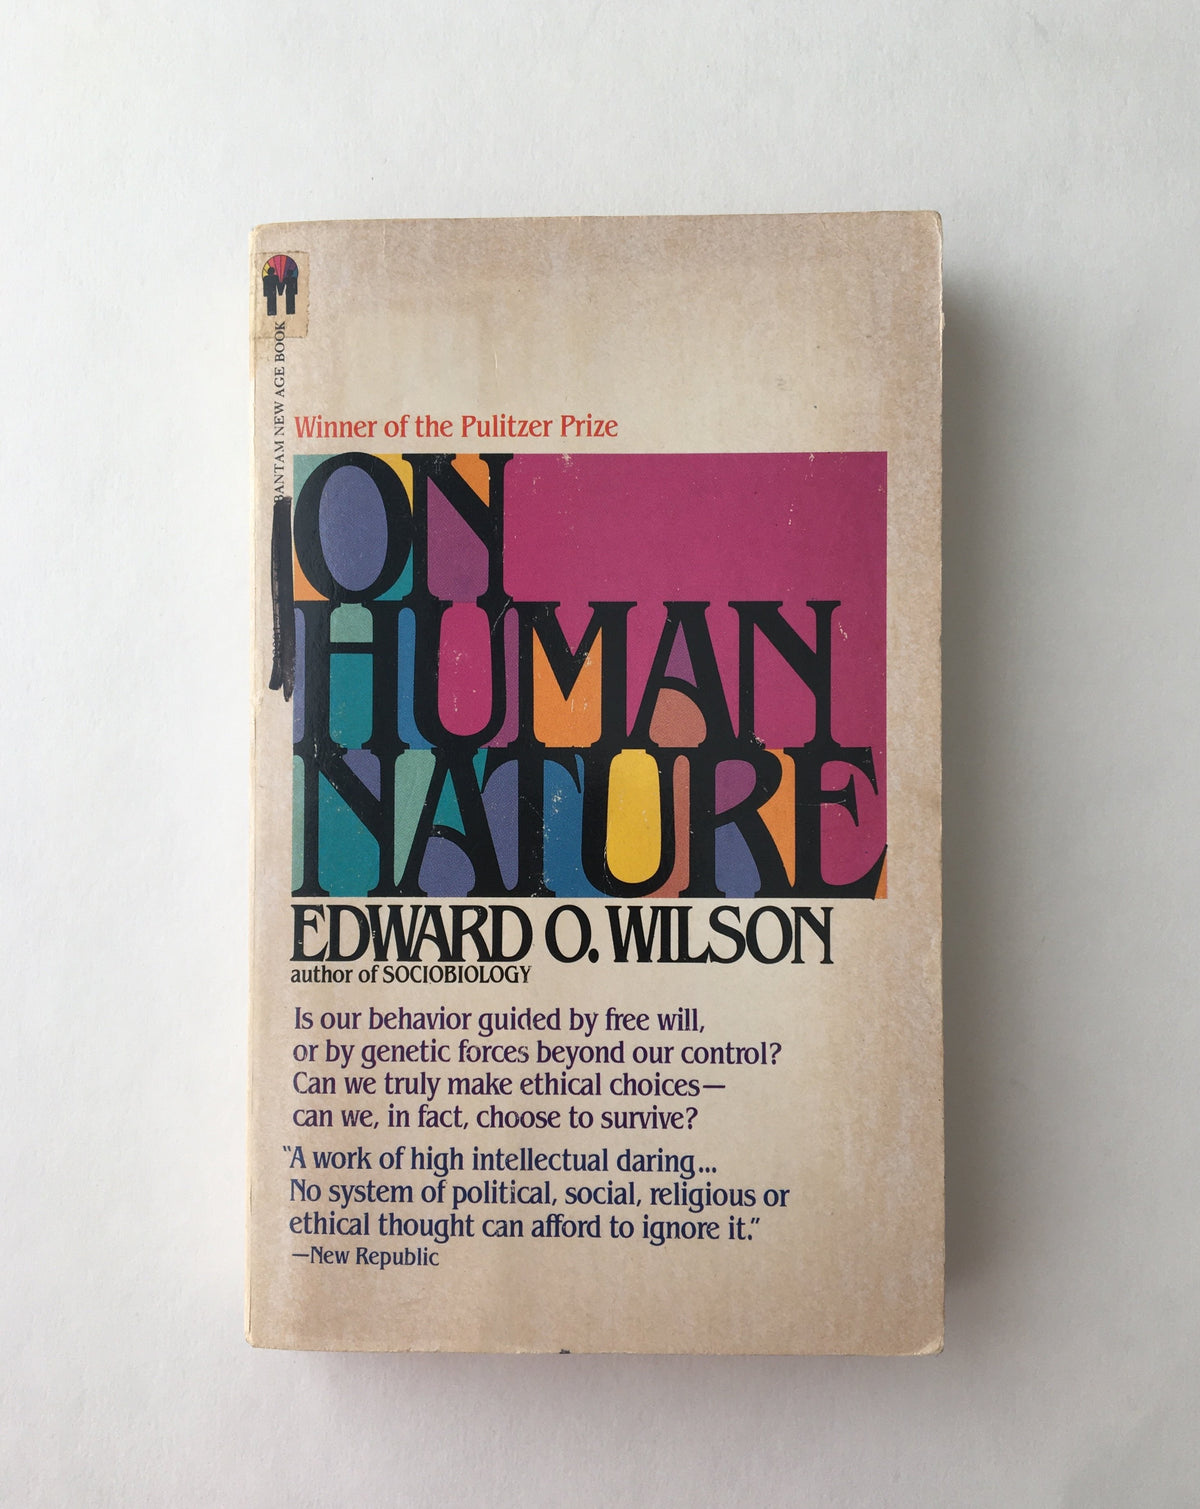 On Human Nature by Edward Wilson